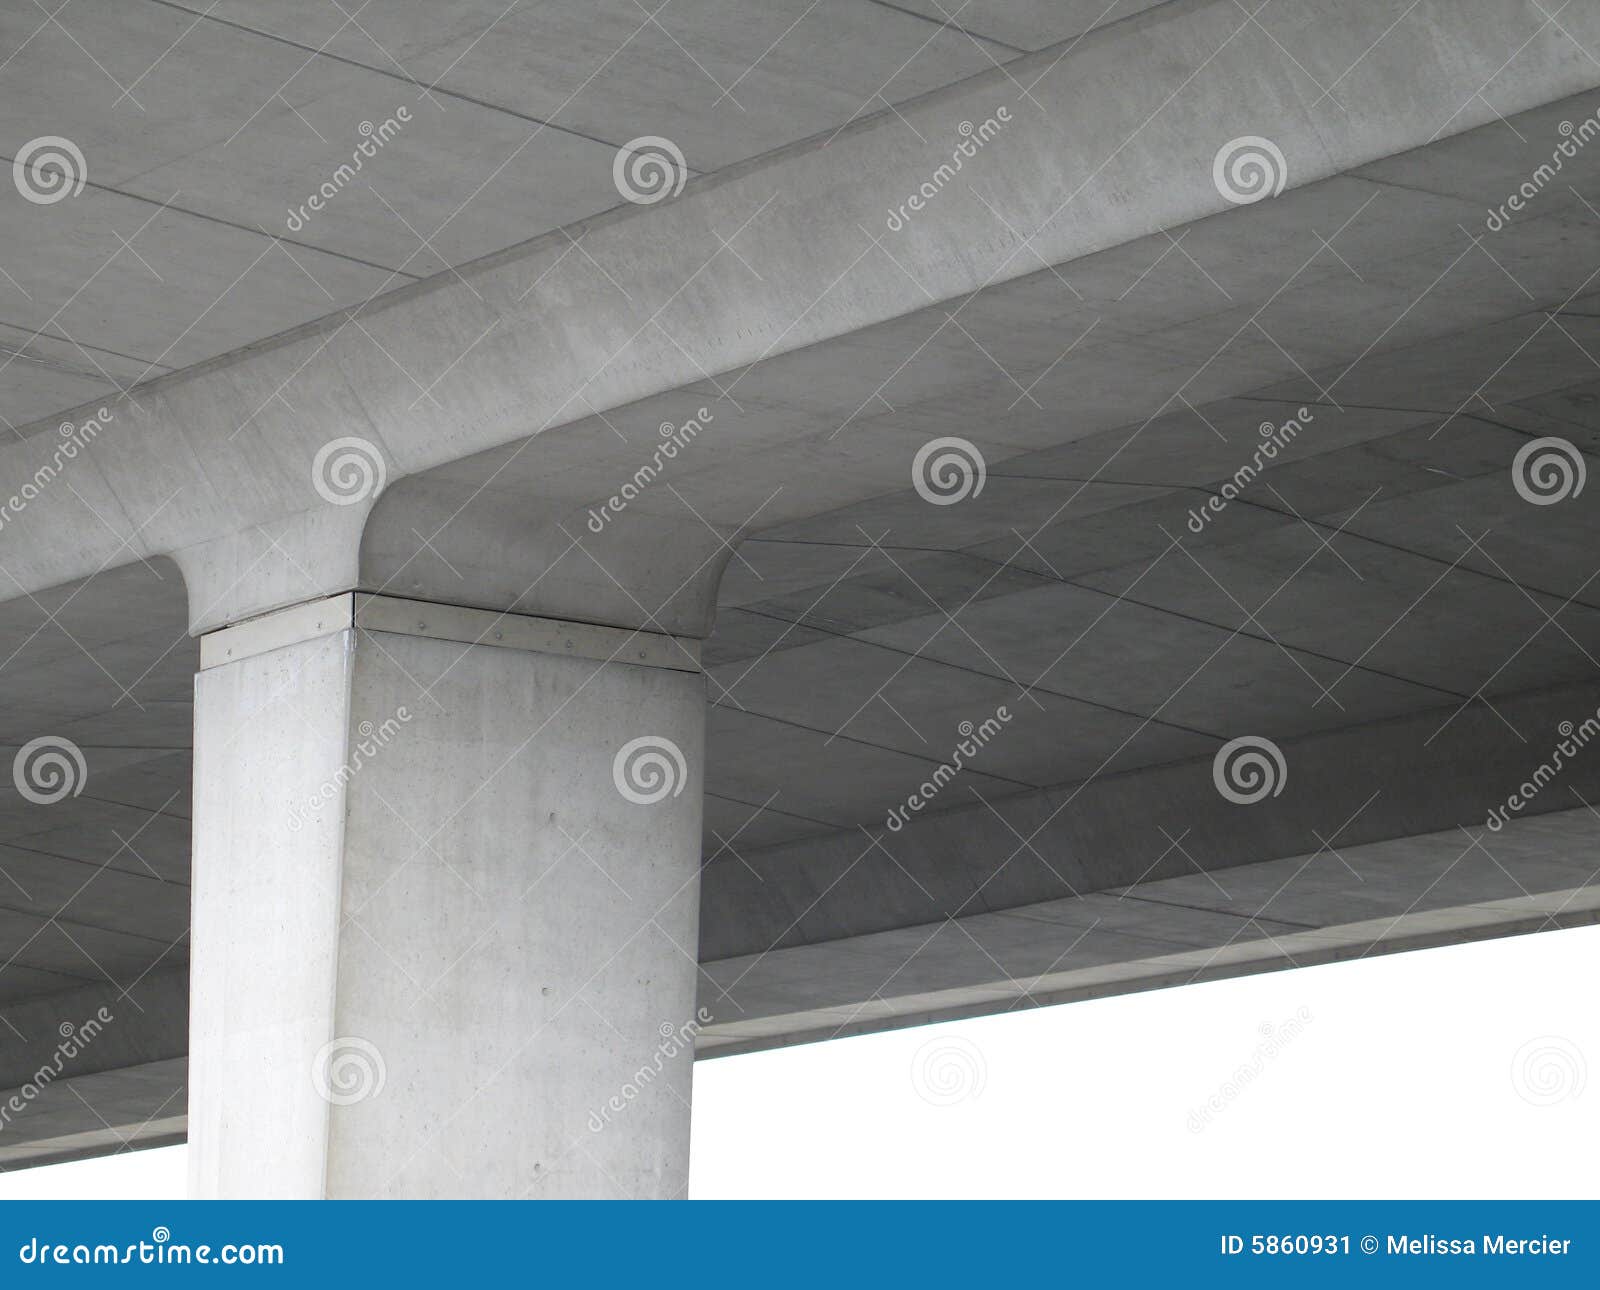 Under a cement highway stock image. Image of bridge, viaduct - 5860931